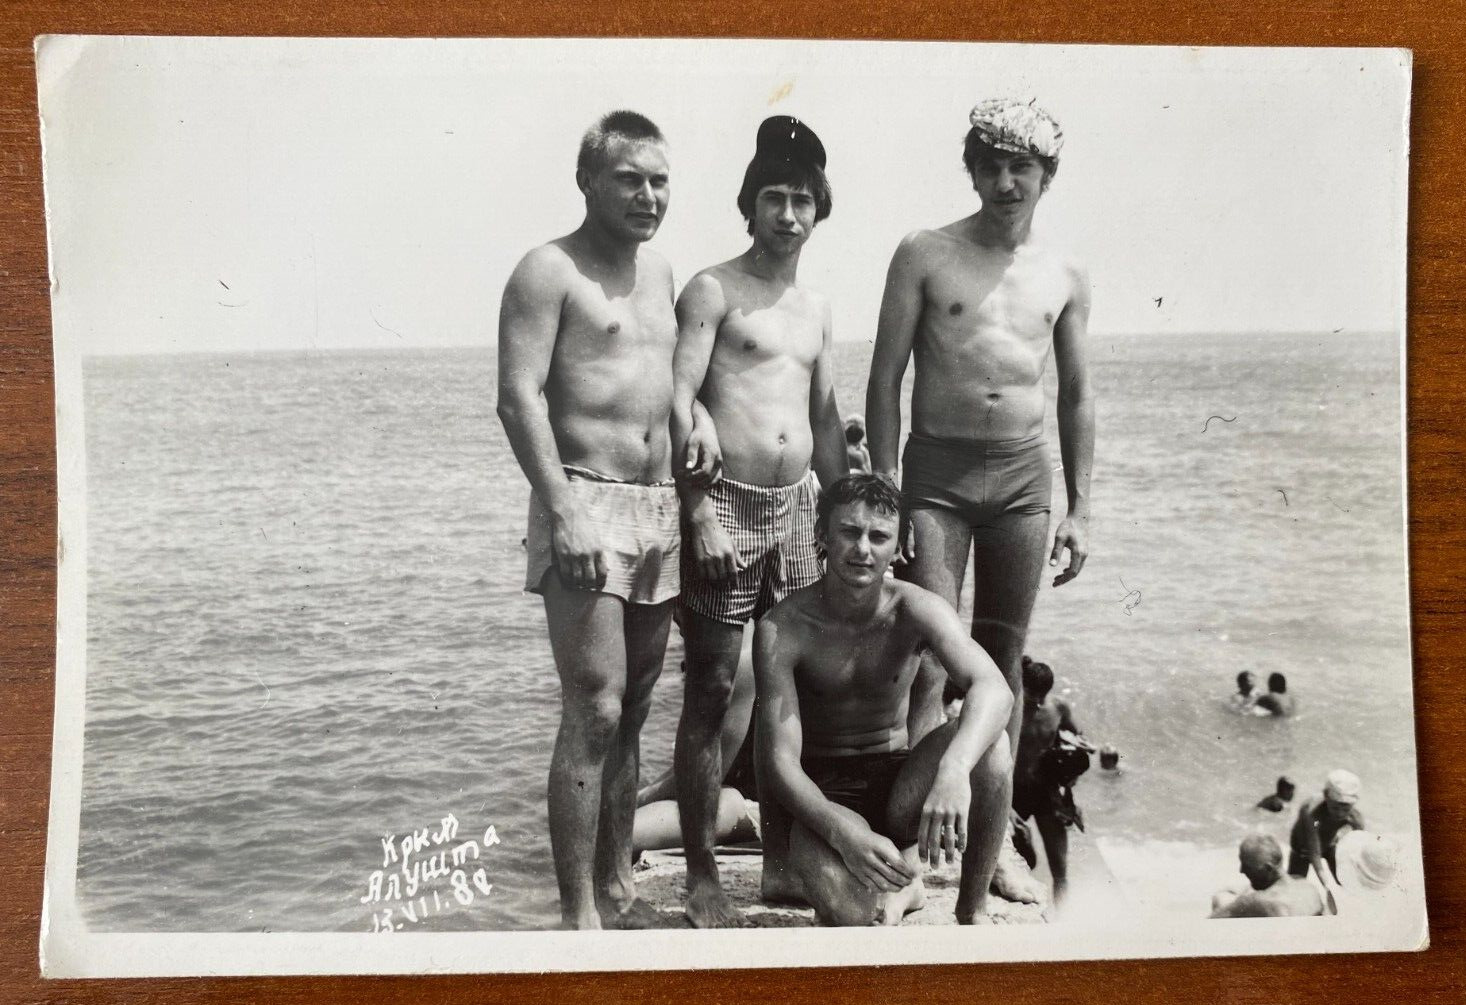 Affectionate gentle men on the beach, guys in swim trunks, naked torso, gay int